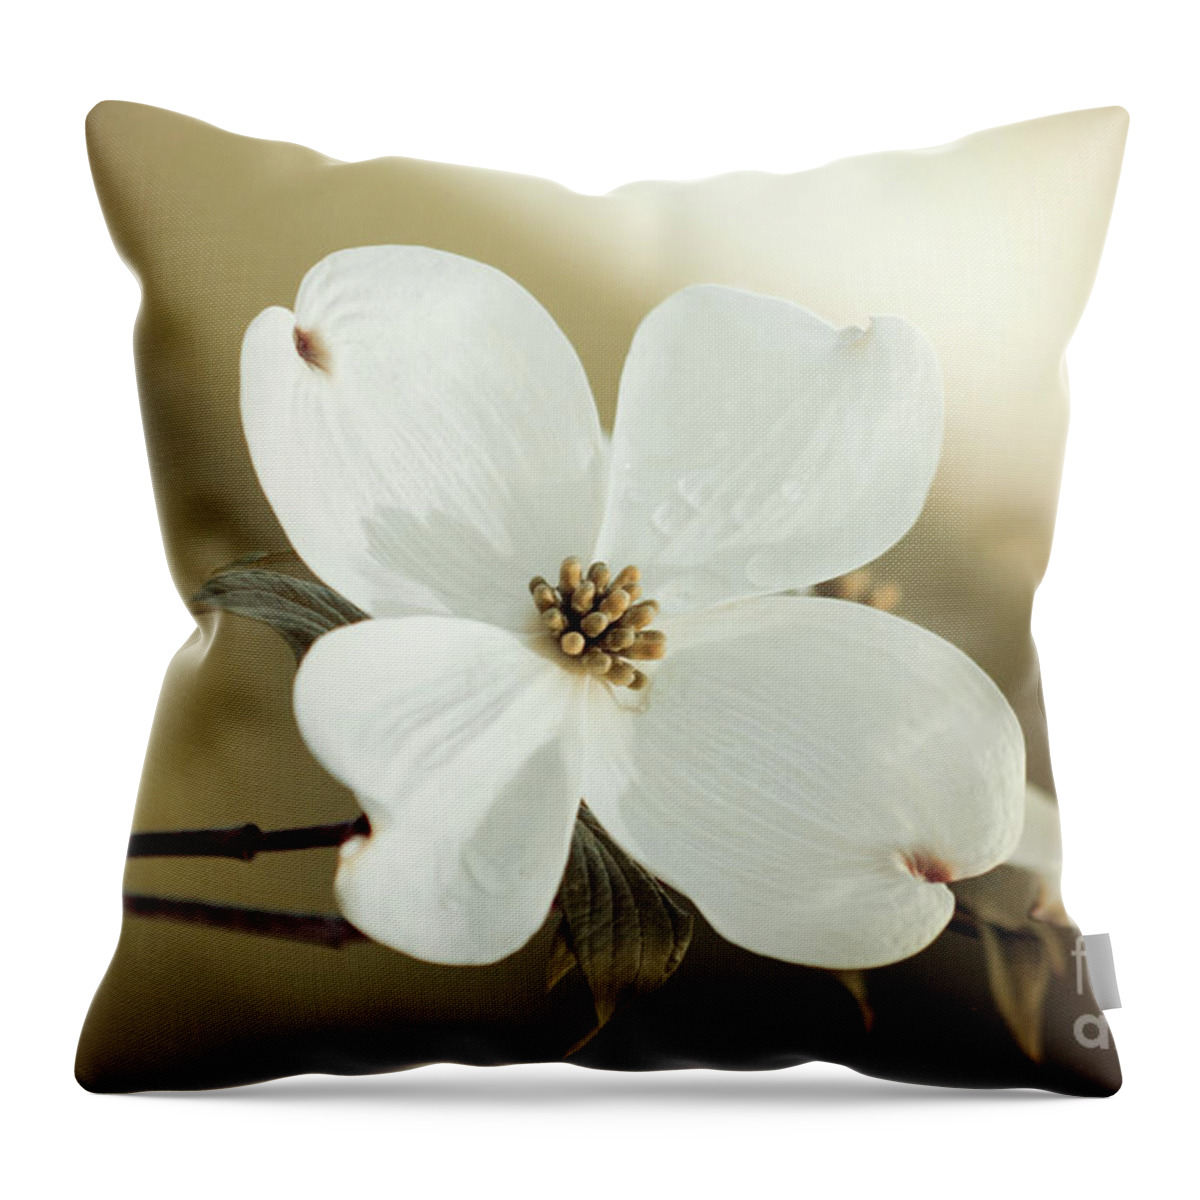 Dogwood; Dogwood Blossom; Blossom; Flower; Vintage; Macro; Close Up; Petals; Green; White; Calm; Horizontal; Leaves; Tree; Branches Throw Pillow featuring the photograph Dogwood in Autumn Hues by Tina Uihlein